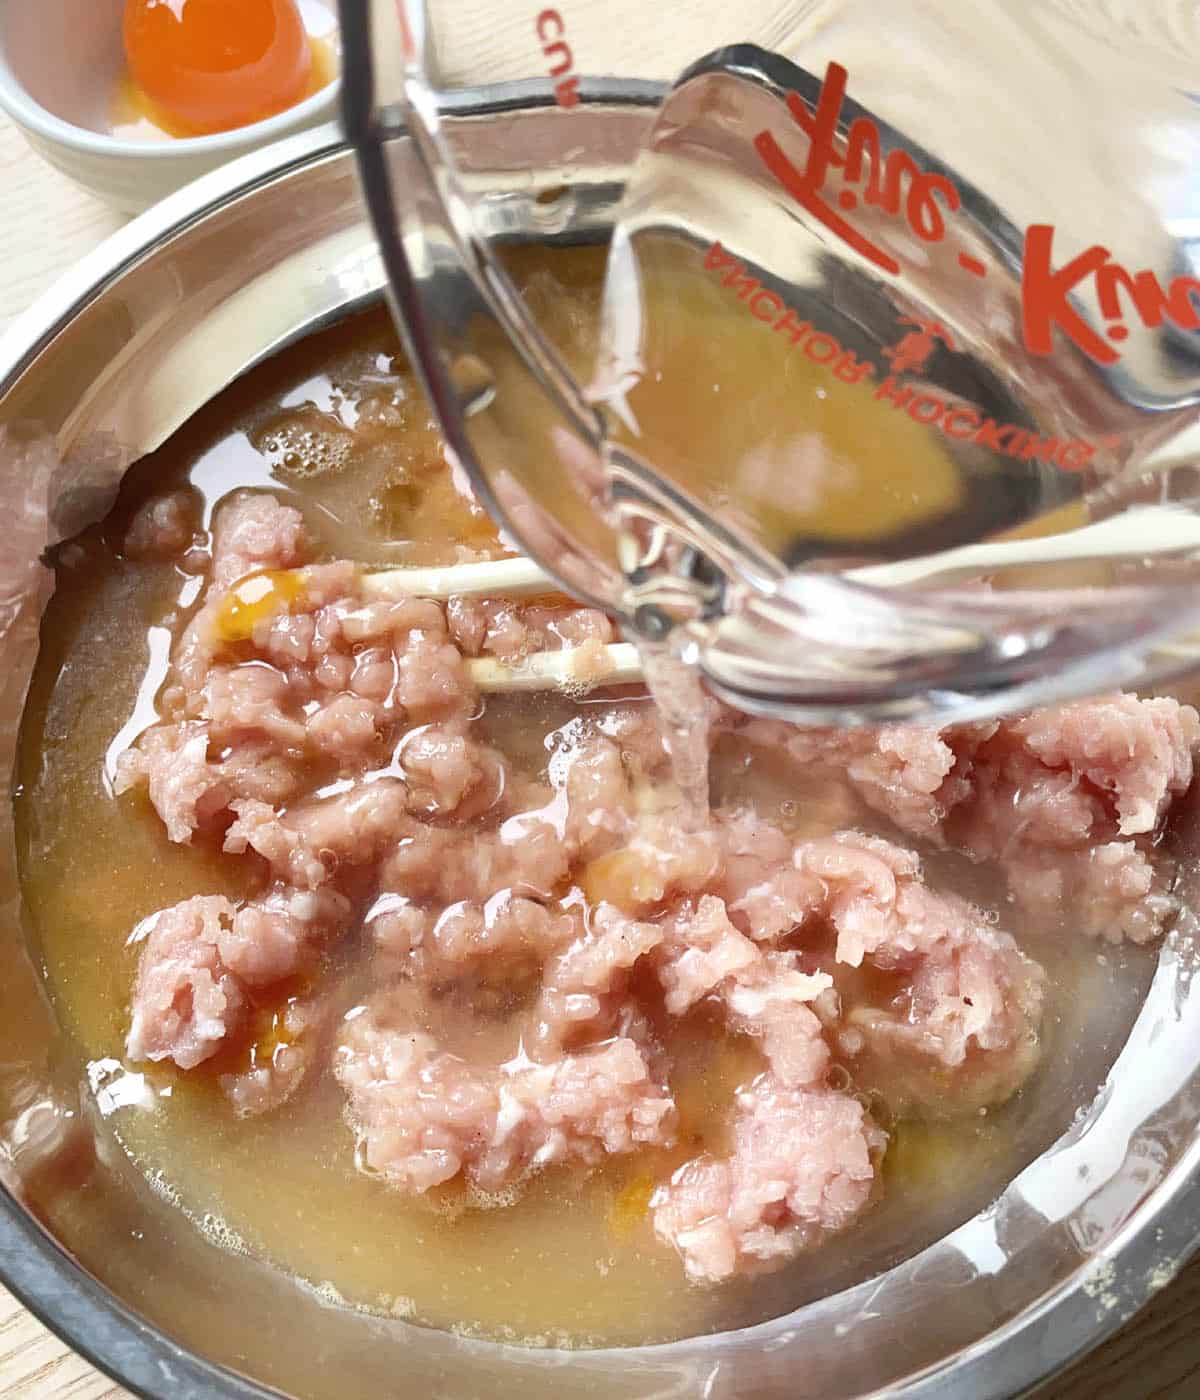 Water being poured into a metal dish containing raw pink ground pork and an egg mixture.